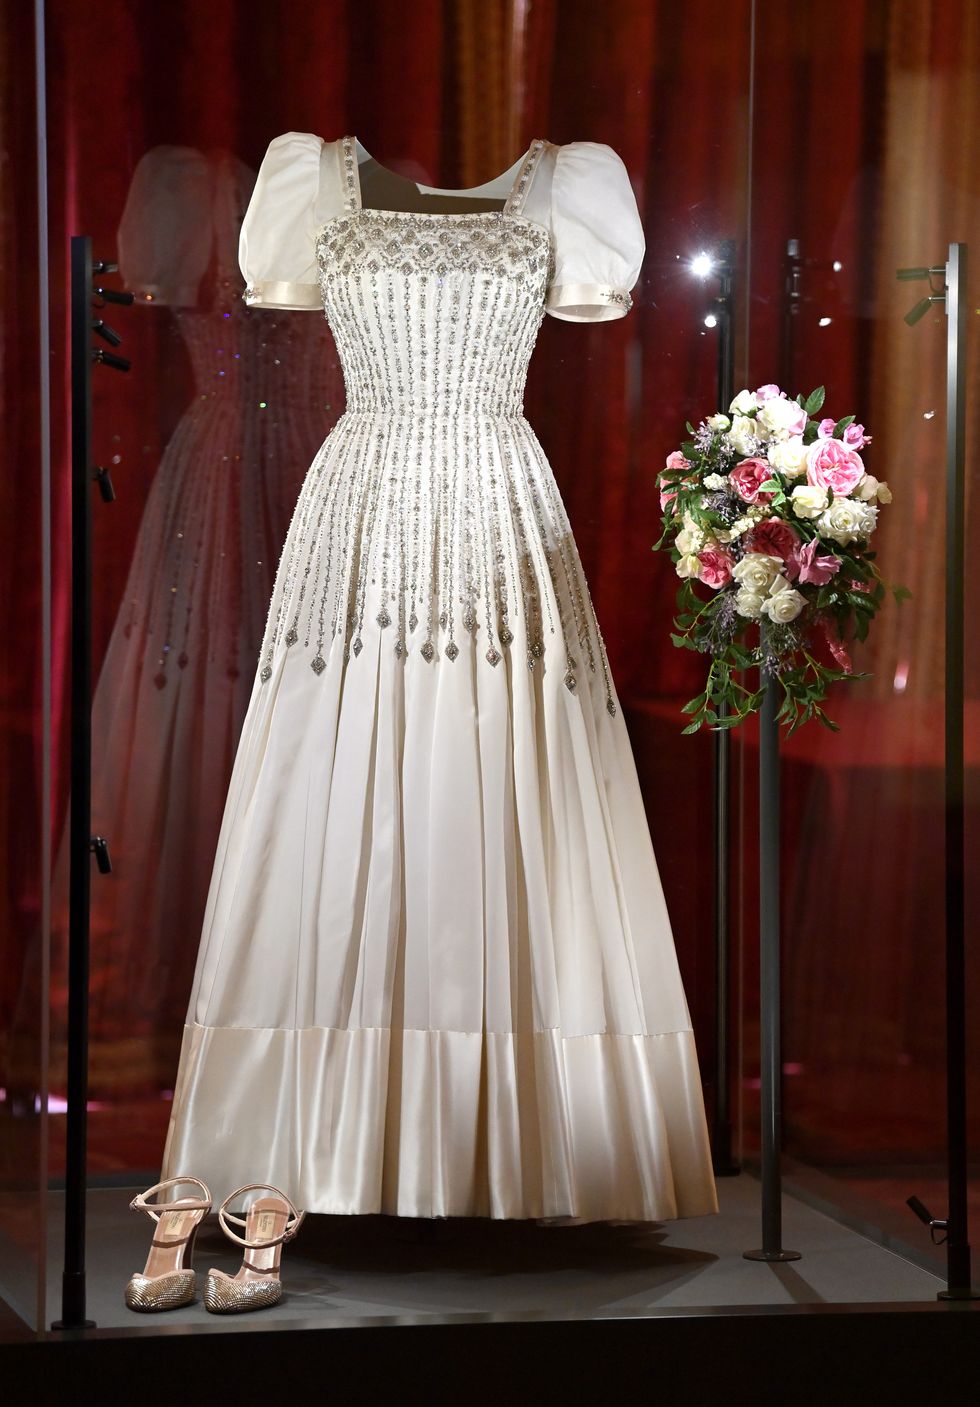 windsor, england   september 23 hrh princess beatrice of yorks wedding dress on display at windsor castle on september 23, 2020 in windsor, england princess beatrice and edoardo mapelli mozzi married on july 18, 2020 in windsor the wedding dress, first worn by her majesty the queen in the 1960s, will go on public display at windsor castle from thursday, 24 september 2020 photo by karwai tangwireimage